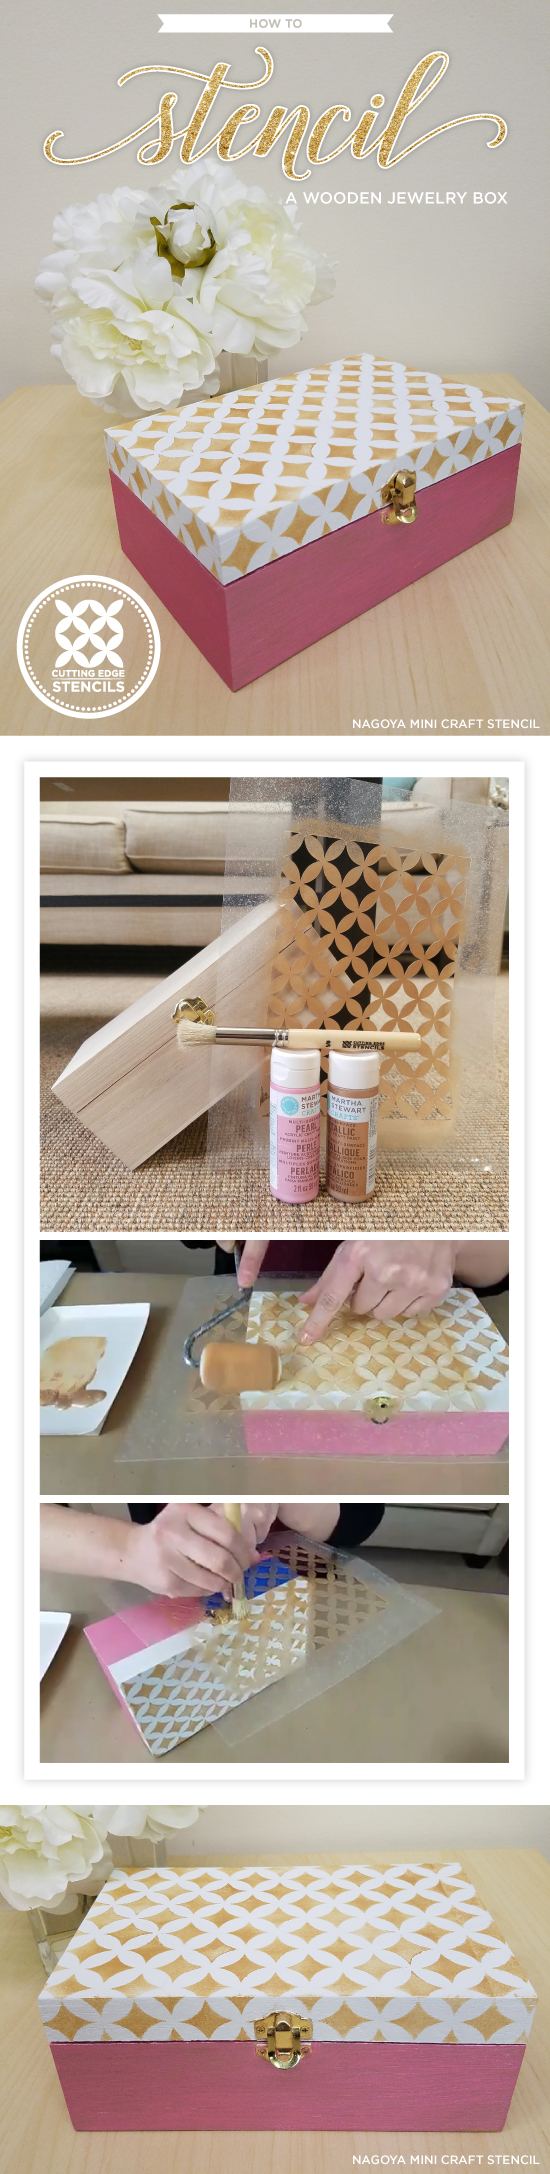 Cutting Edge Stencils shares how to stencil a wooden jewelry box in blush gold and pink using the Nagoya Card Stencil and craft paint. http://www.cuttingedgestencils.com/nagoya-handmade-card-craft-stencils-templates.html